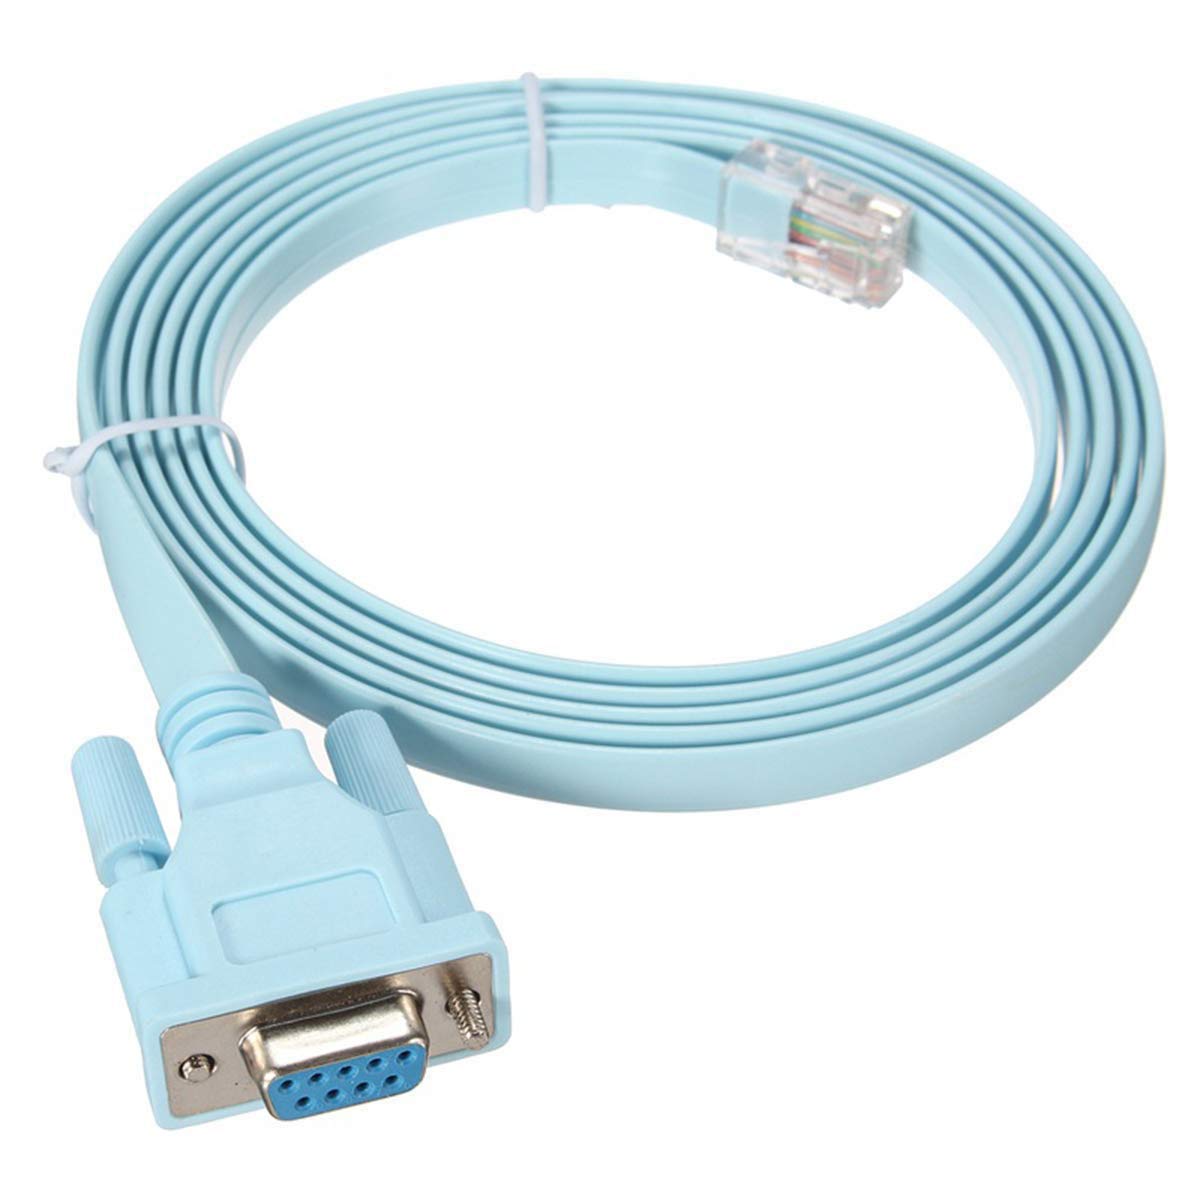 Db9 To Rj45 Console Cable